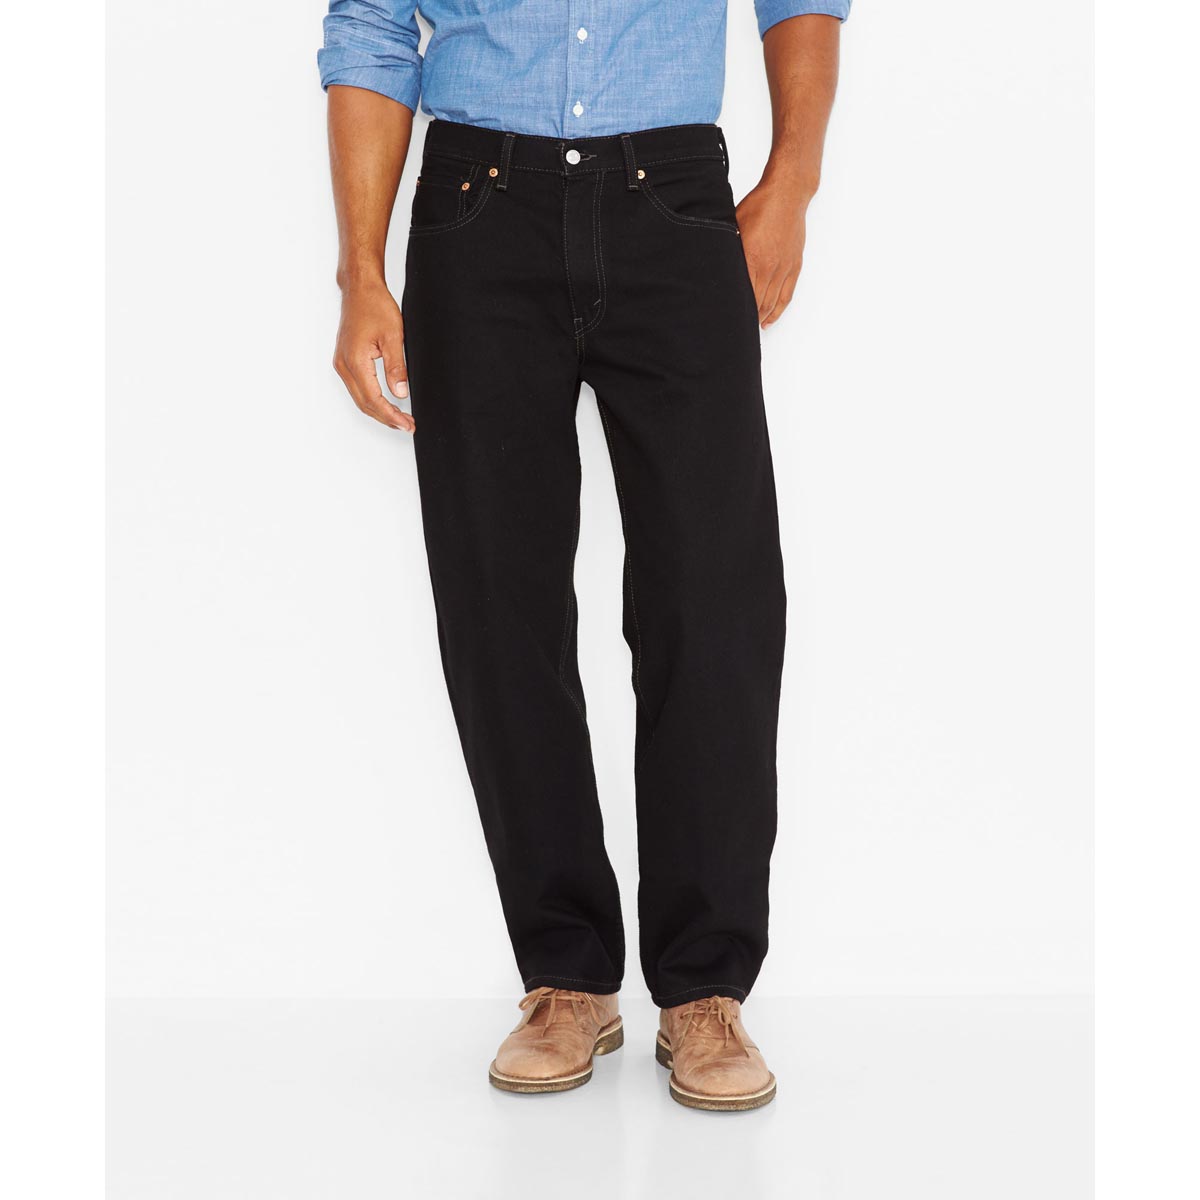 Levi Men's 550 Relaxed Fit Jeans